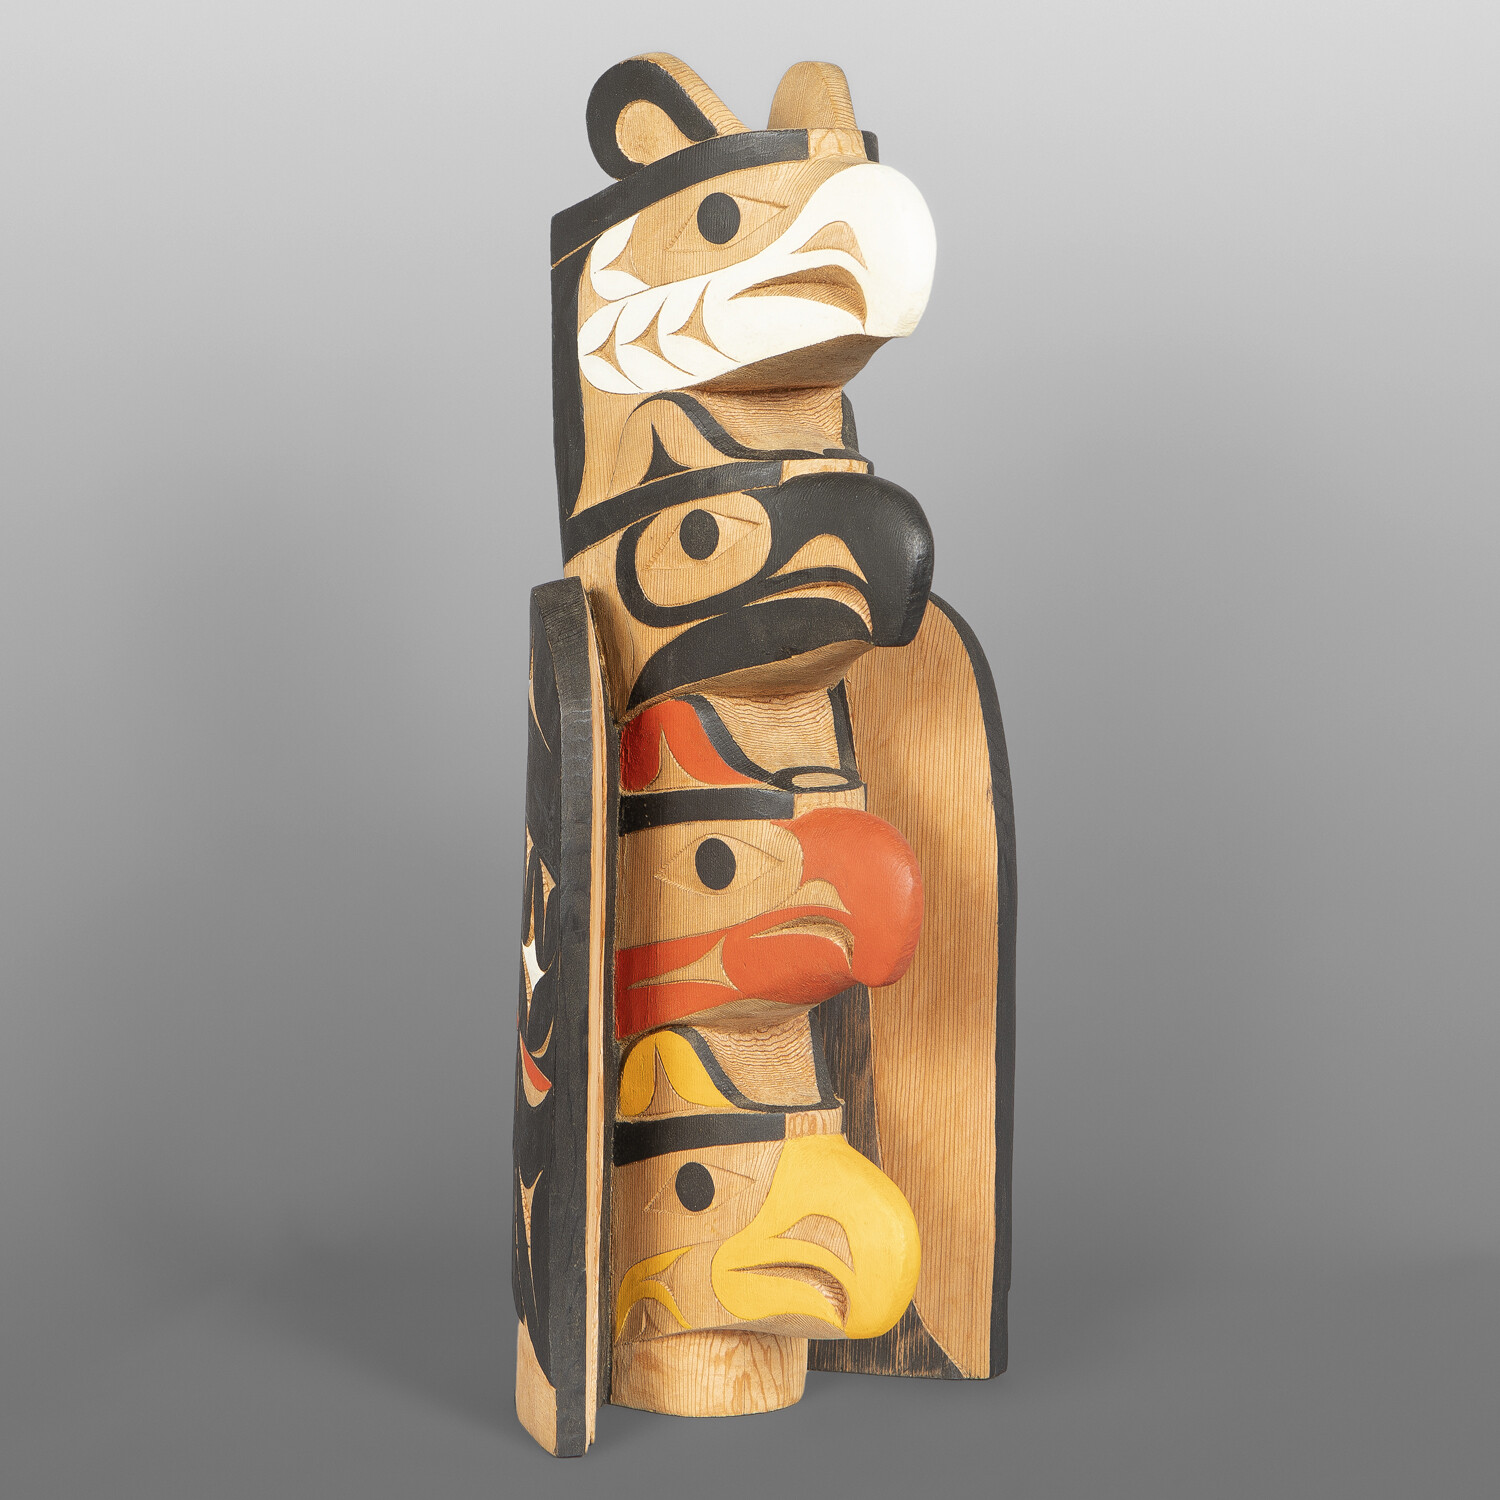 Brothers of the Four Directions Tim Paul
Nuu-Chah-Nulth Red cedar, paint
7¾” x 18½” x 6½”